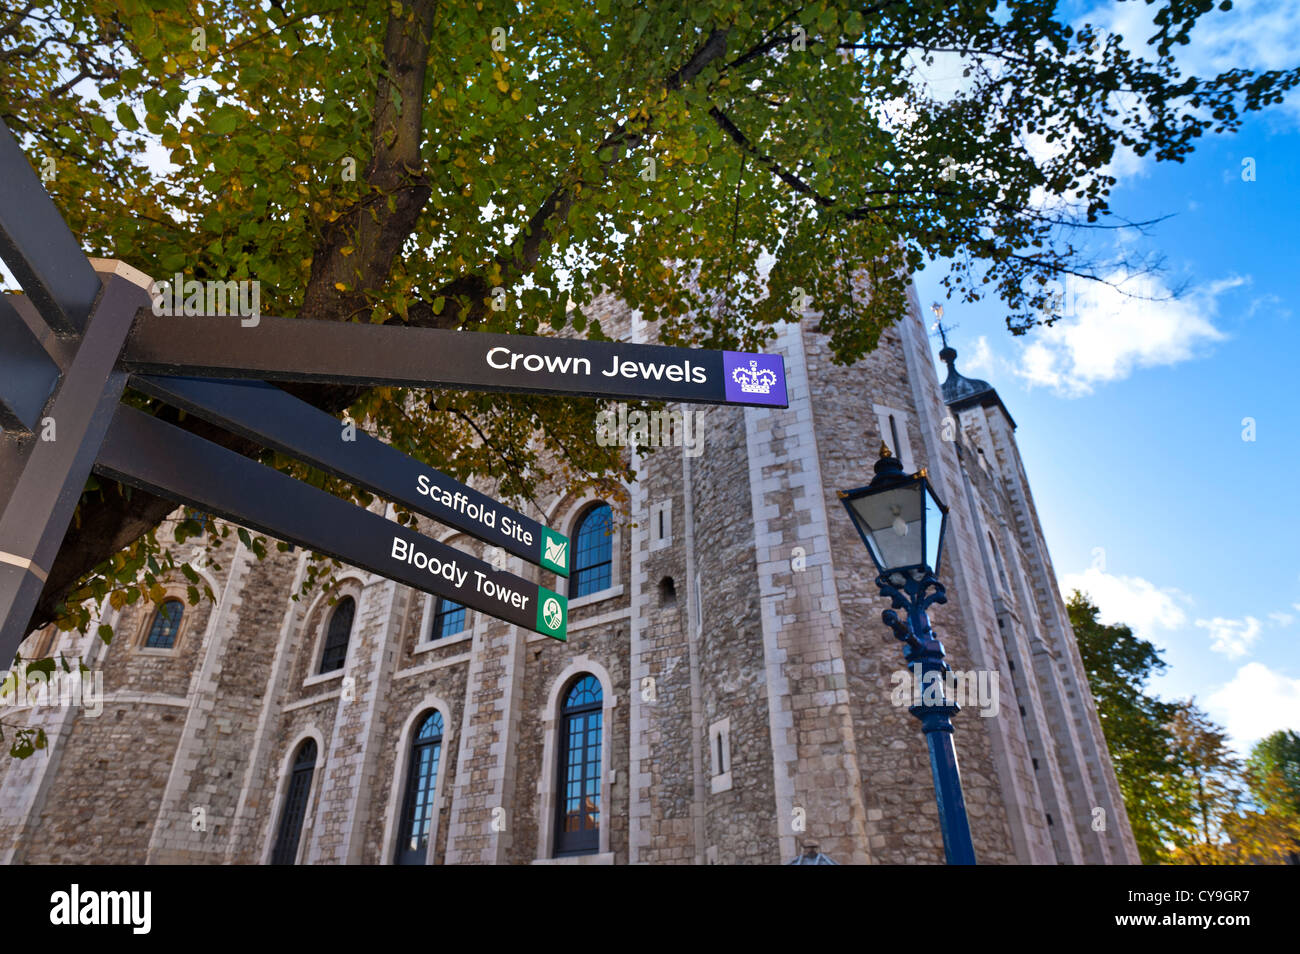 Crown Jewels, Scaffold, Bloody Tower, Sign post at Tower of London directing visitors to points of interest White Tower building behind London UK Stock Photo